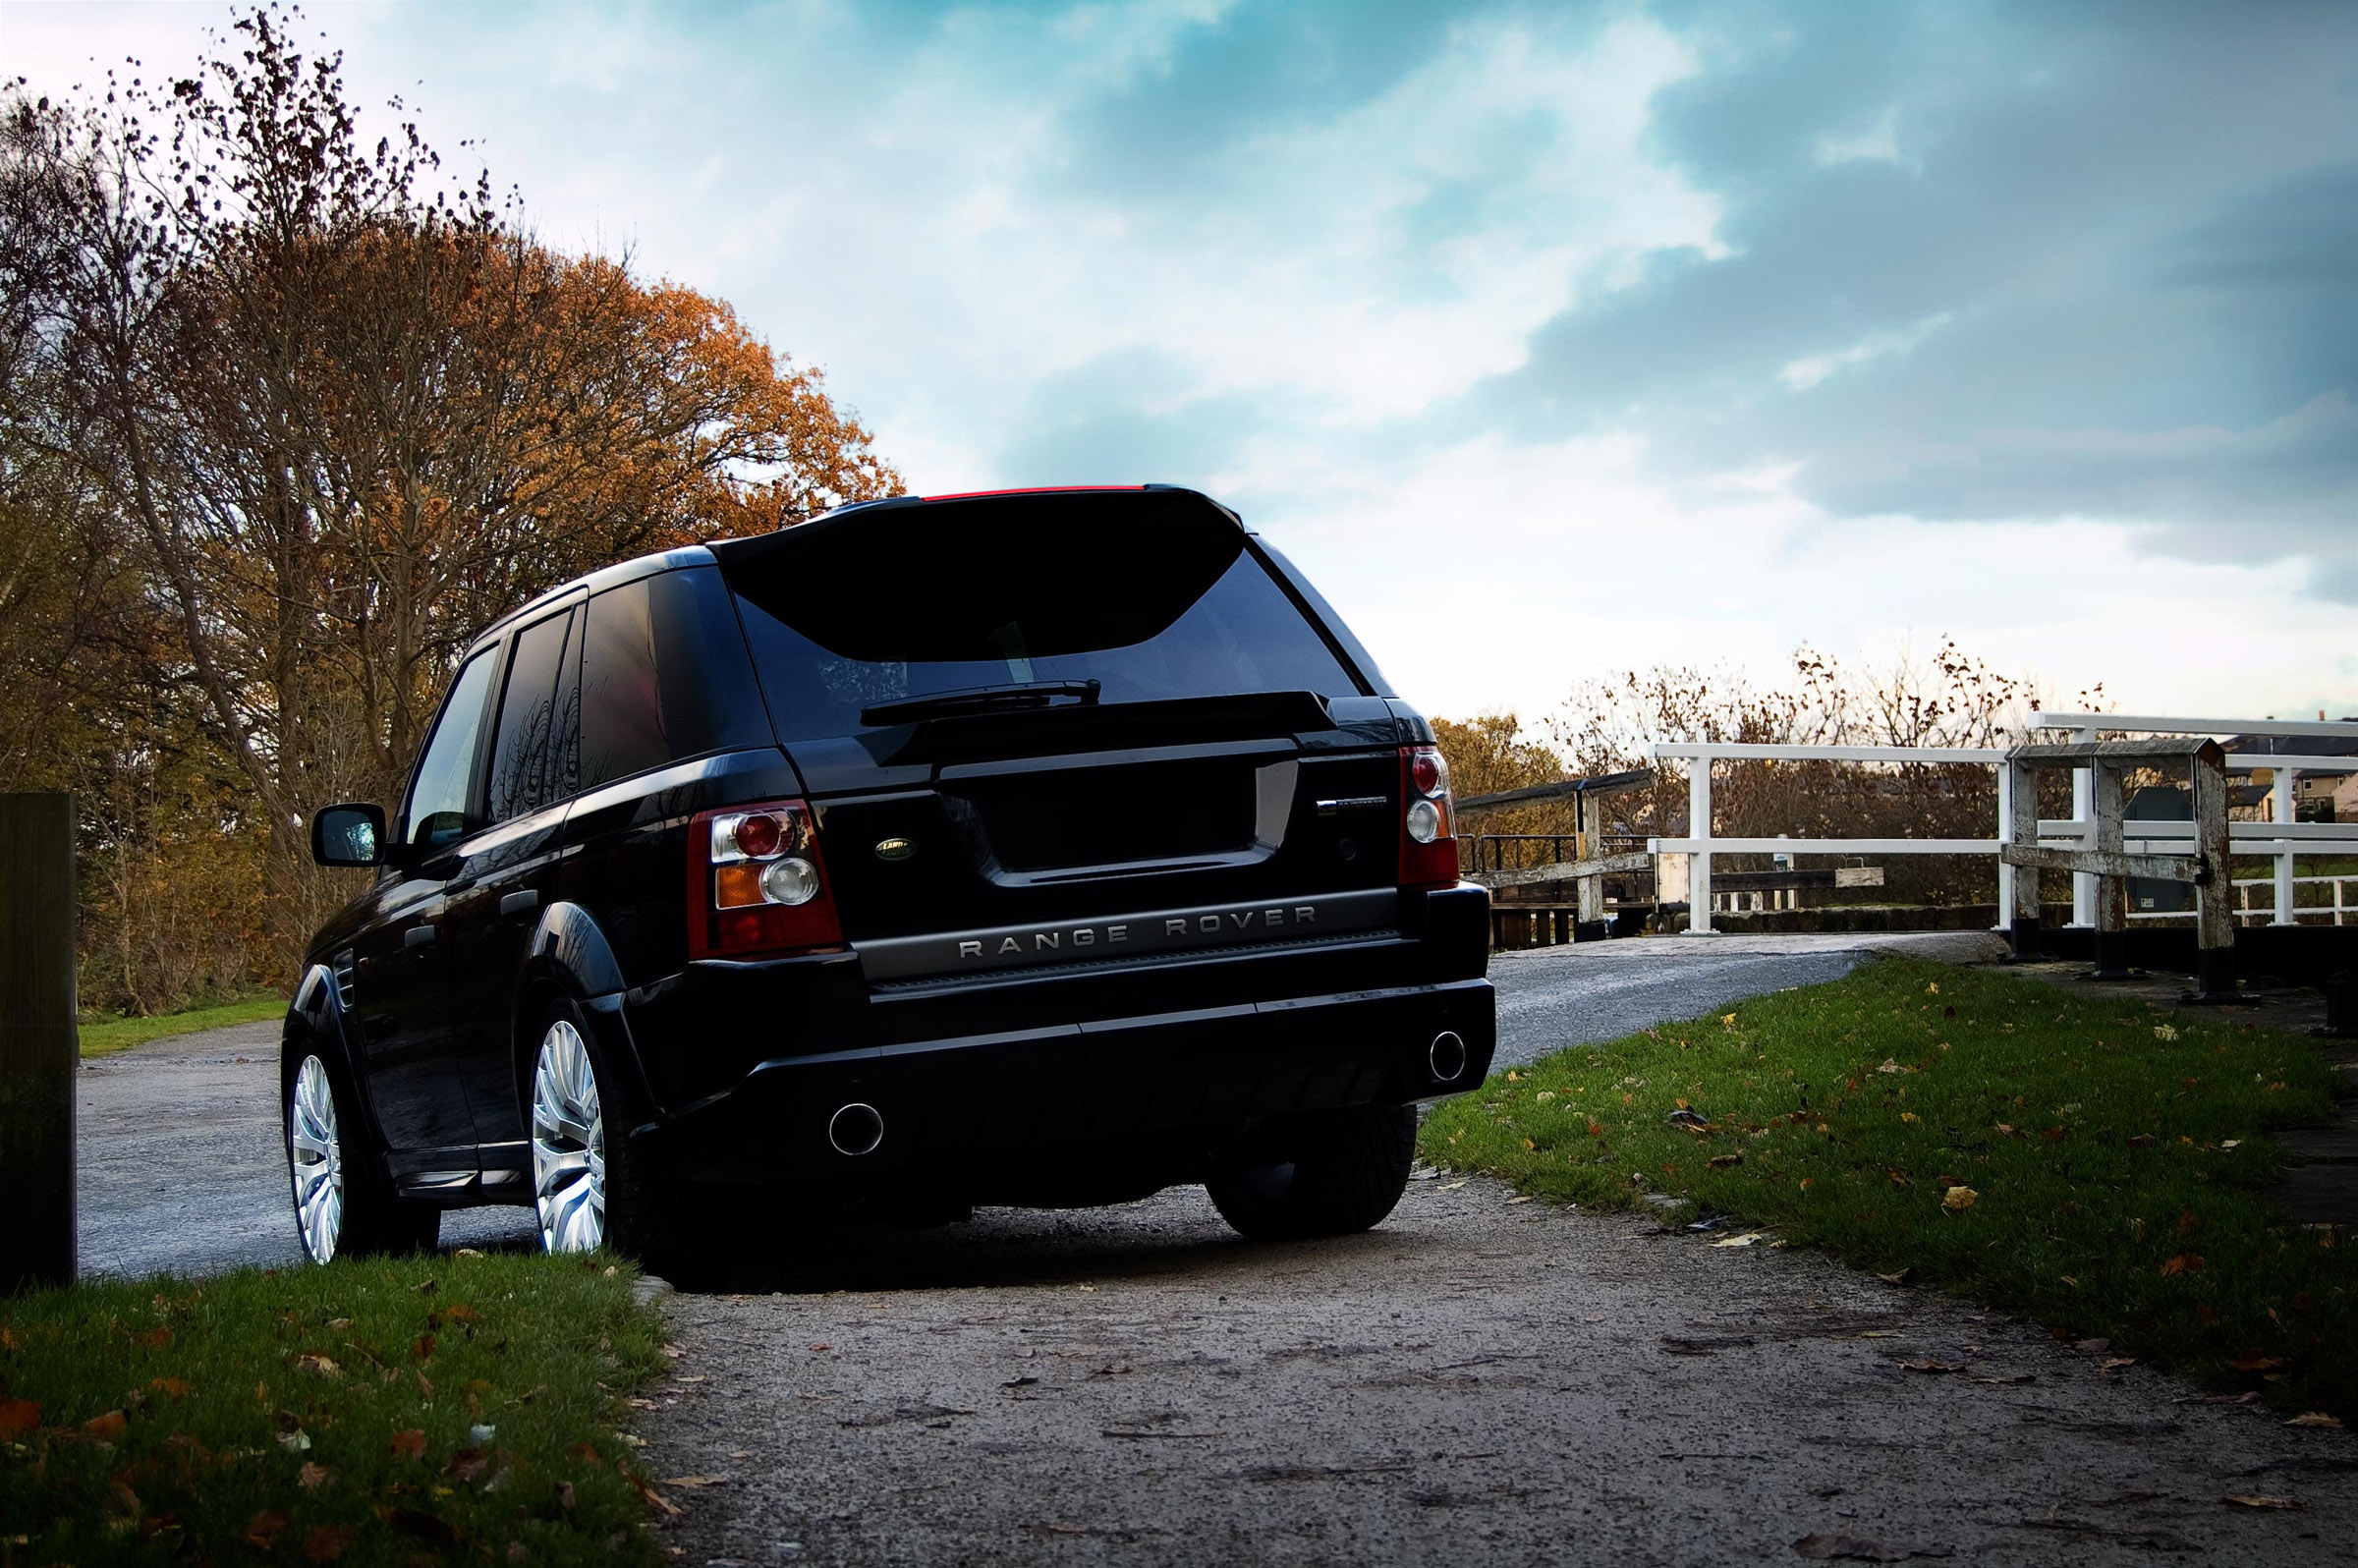 Kahn Cosworth 300 Range Rover Sport (2009) - pictures & information